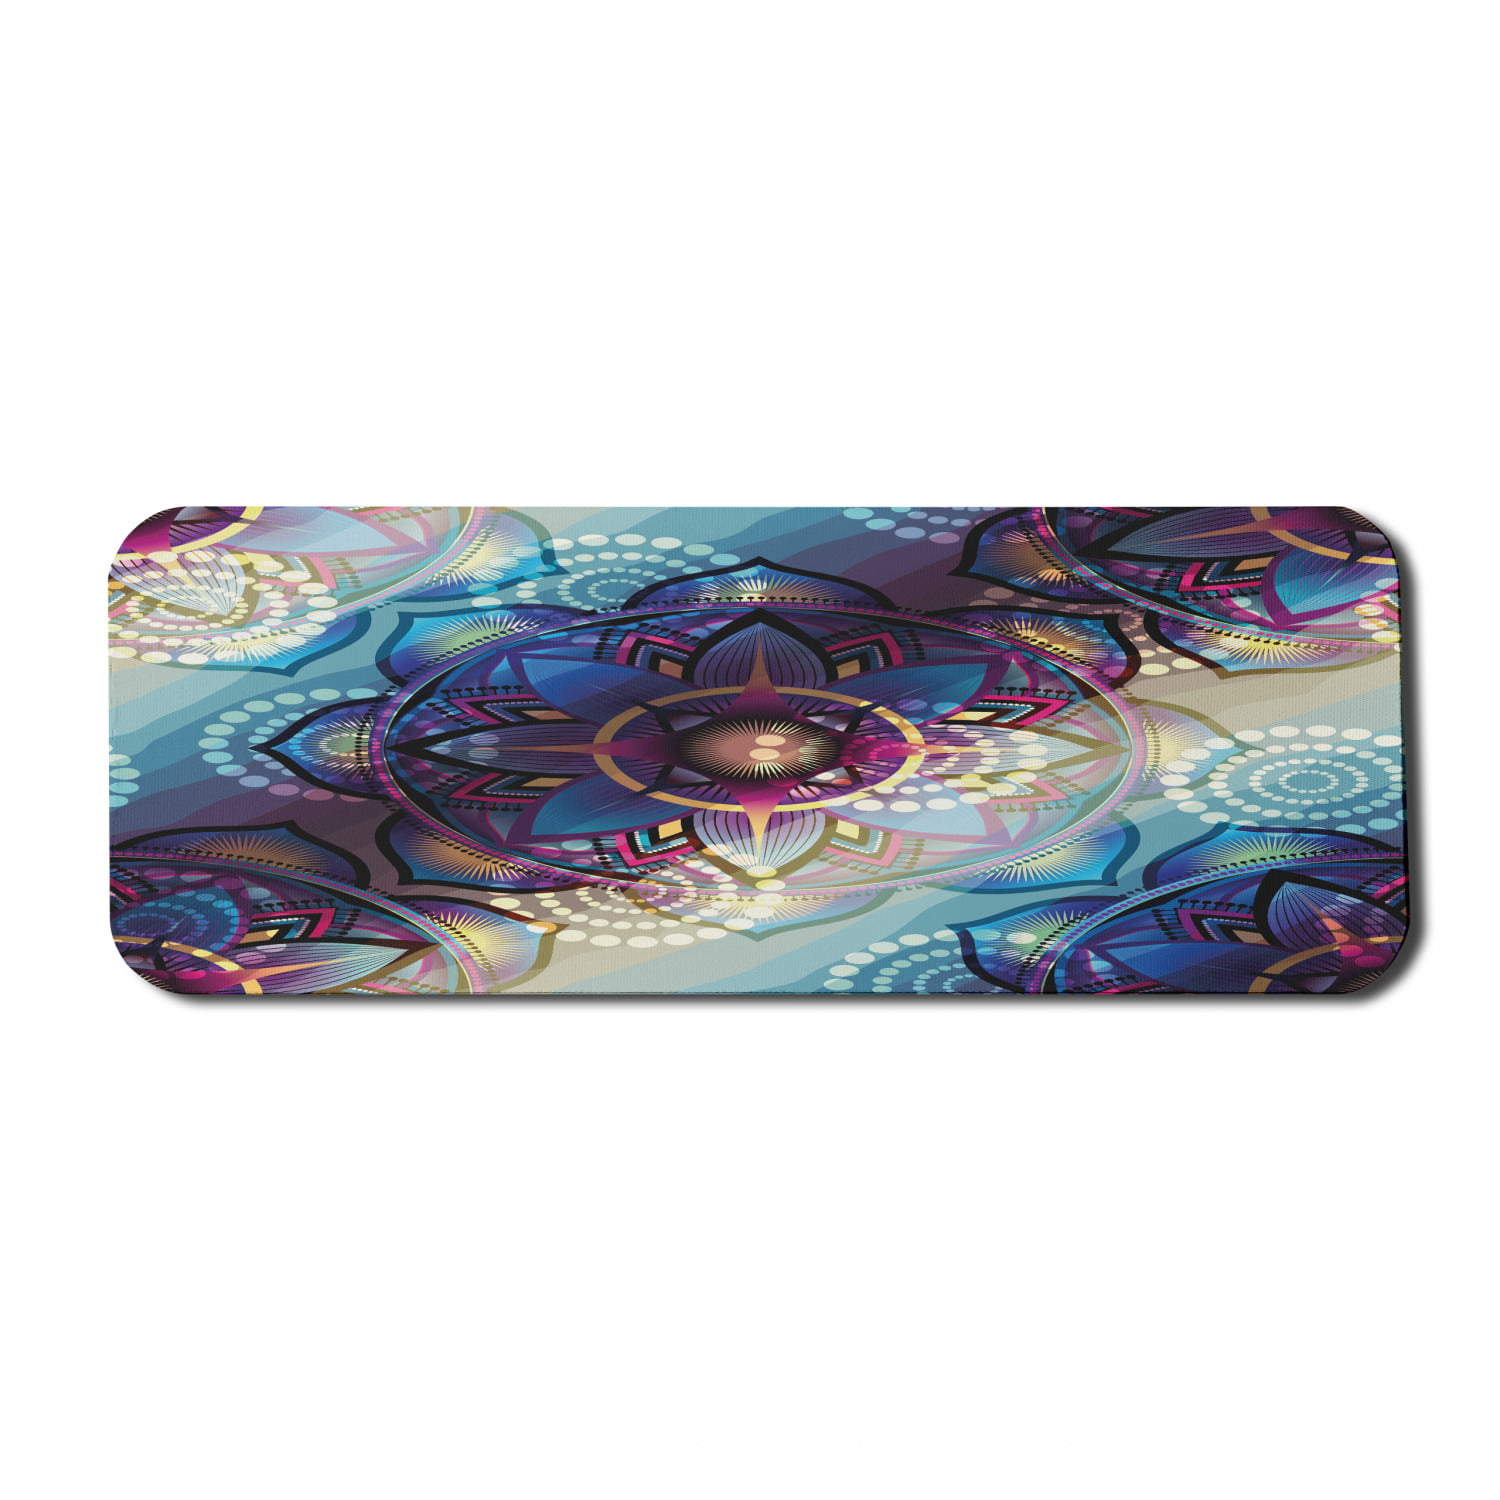 Trippy Multi Pot Leaves Mousepad Non-Slip Rubber Gaming Mouse Pad Mouse Pads for Computers Laptop 11.8 X 31.5 in 